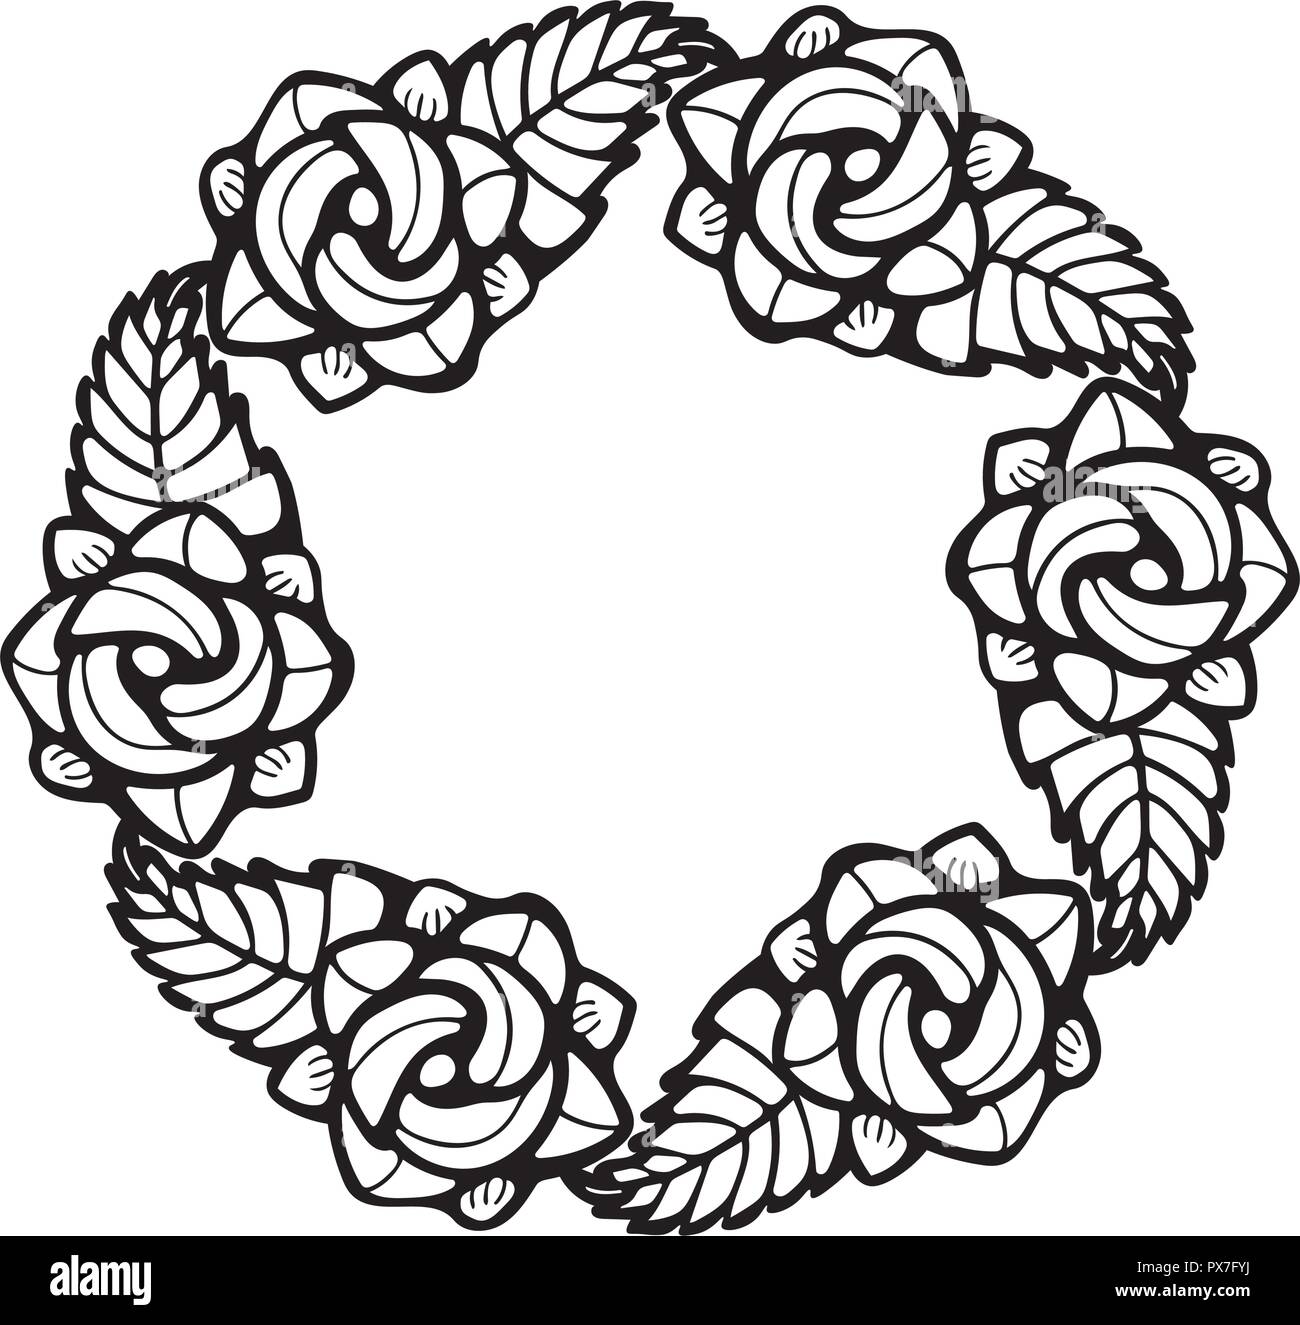 Roses Garland Decoration in stained glass style Stock Vector